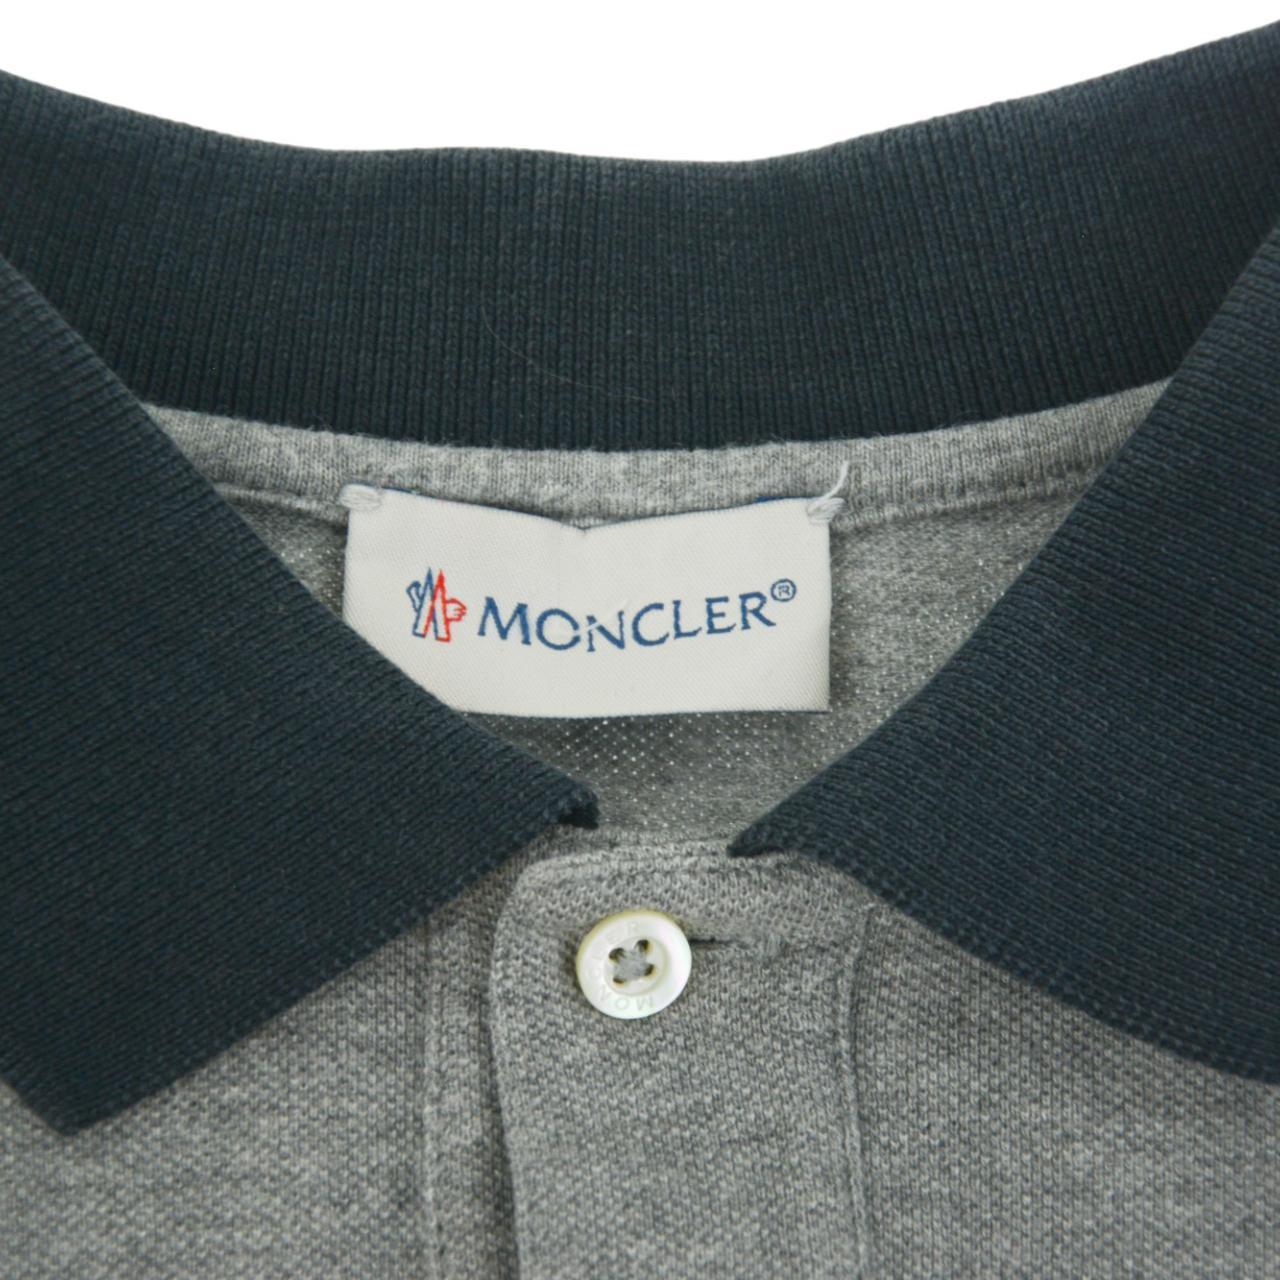 Vintage Moncler Long Sleeve Polo Shirt Women's Size S - Known Source